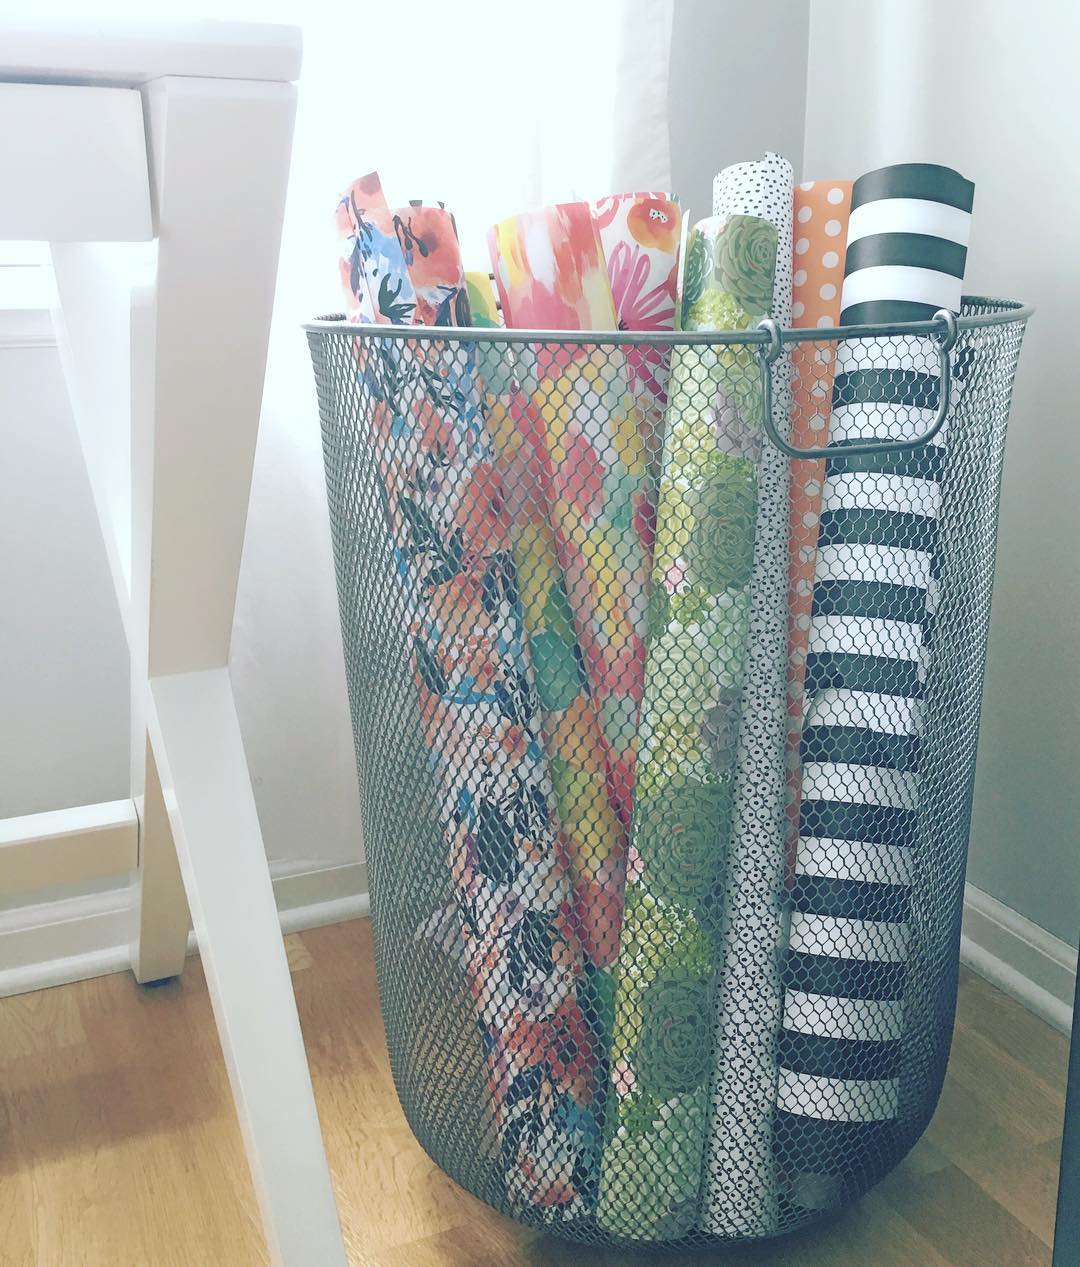 Wrapping paper in wire bin. Photo by Instagram user @mylittledesigncompany